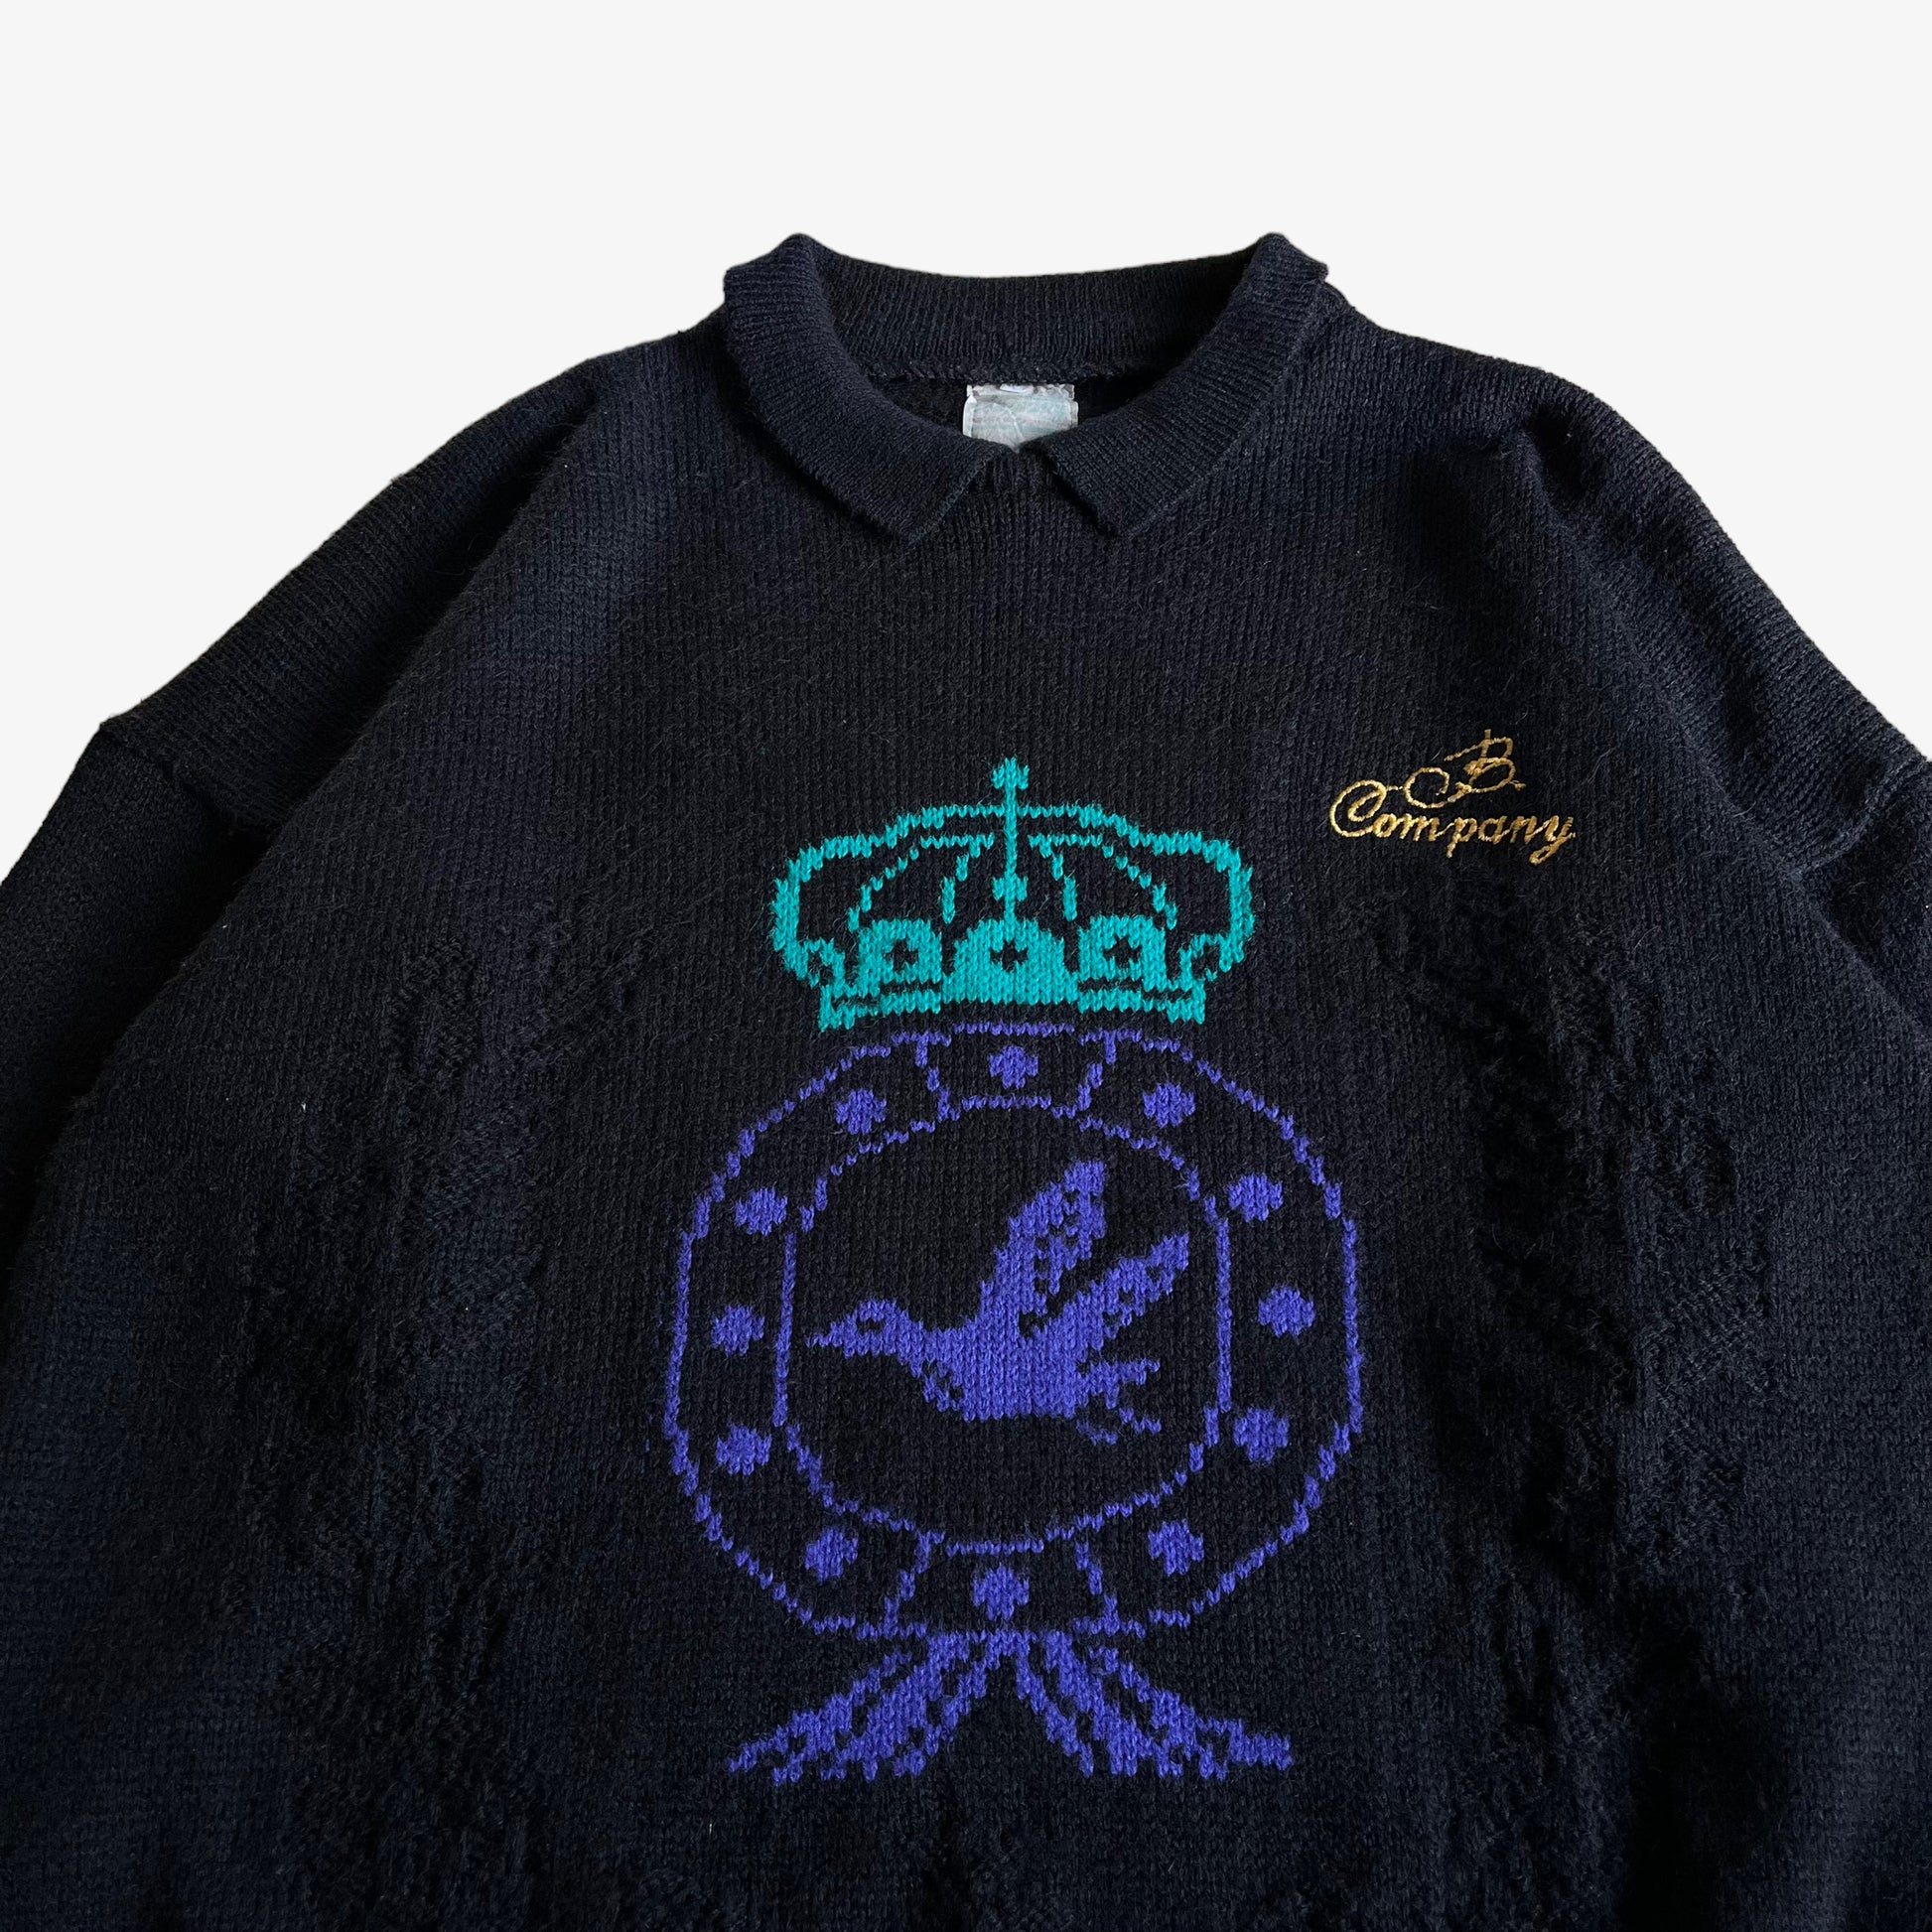 Vintage 1980s Best Company Bird And Crown Crest Graphic Print Knitted Collared Jumper Badge - Casspios Dream